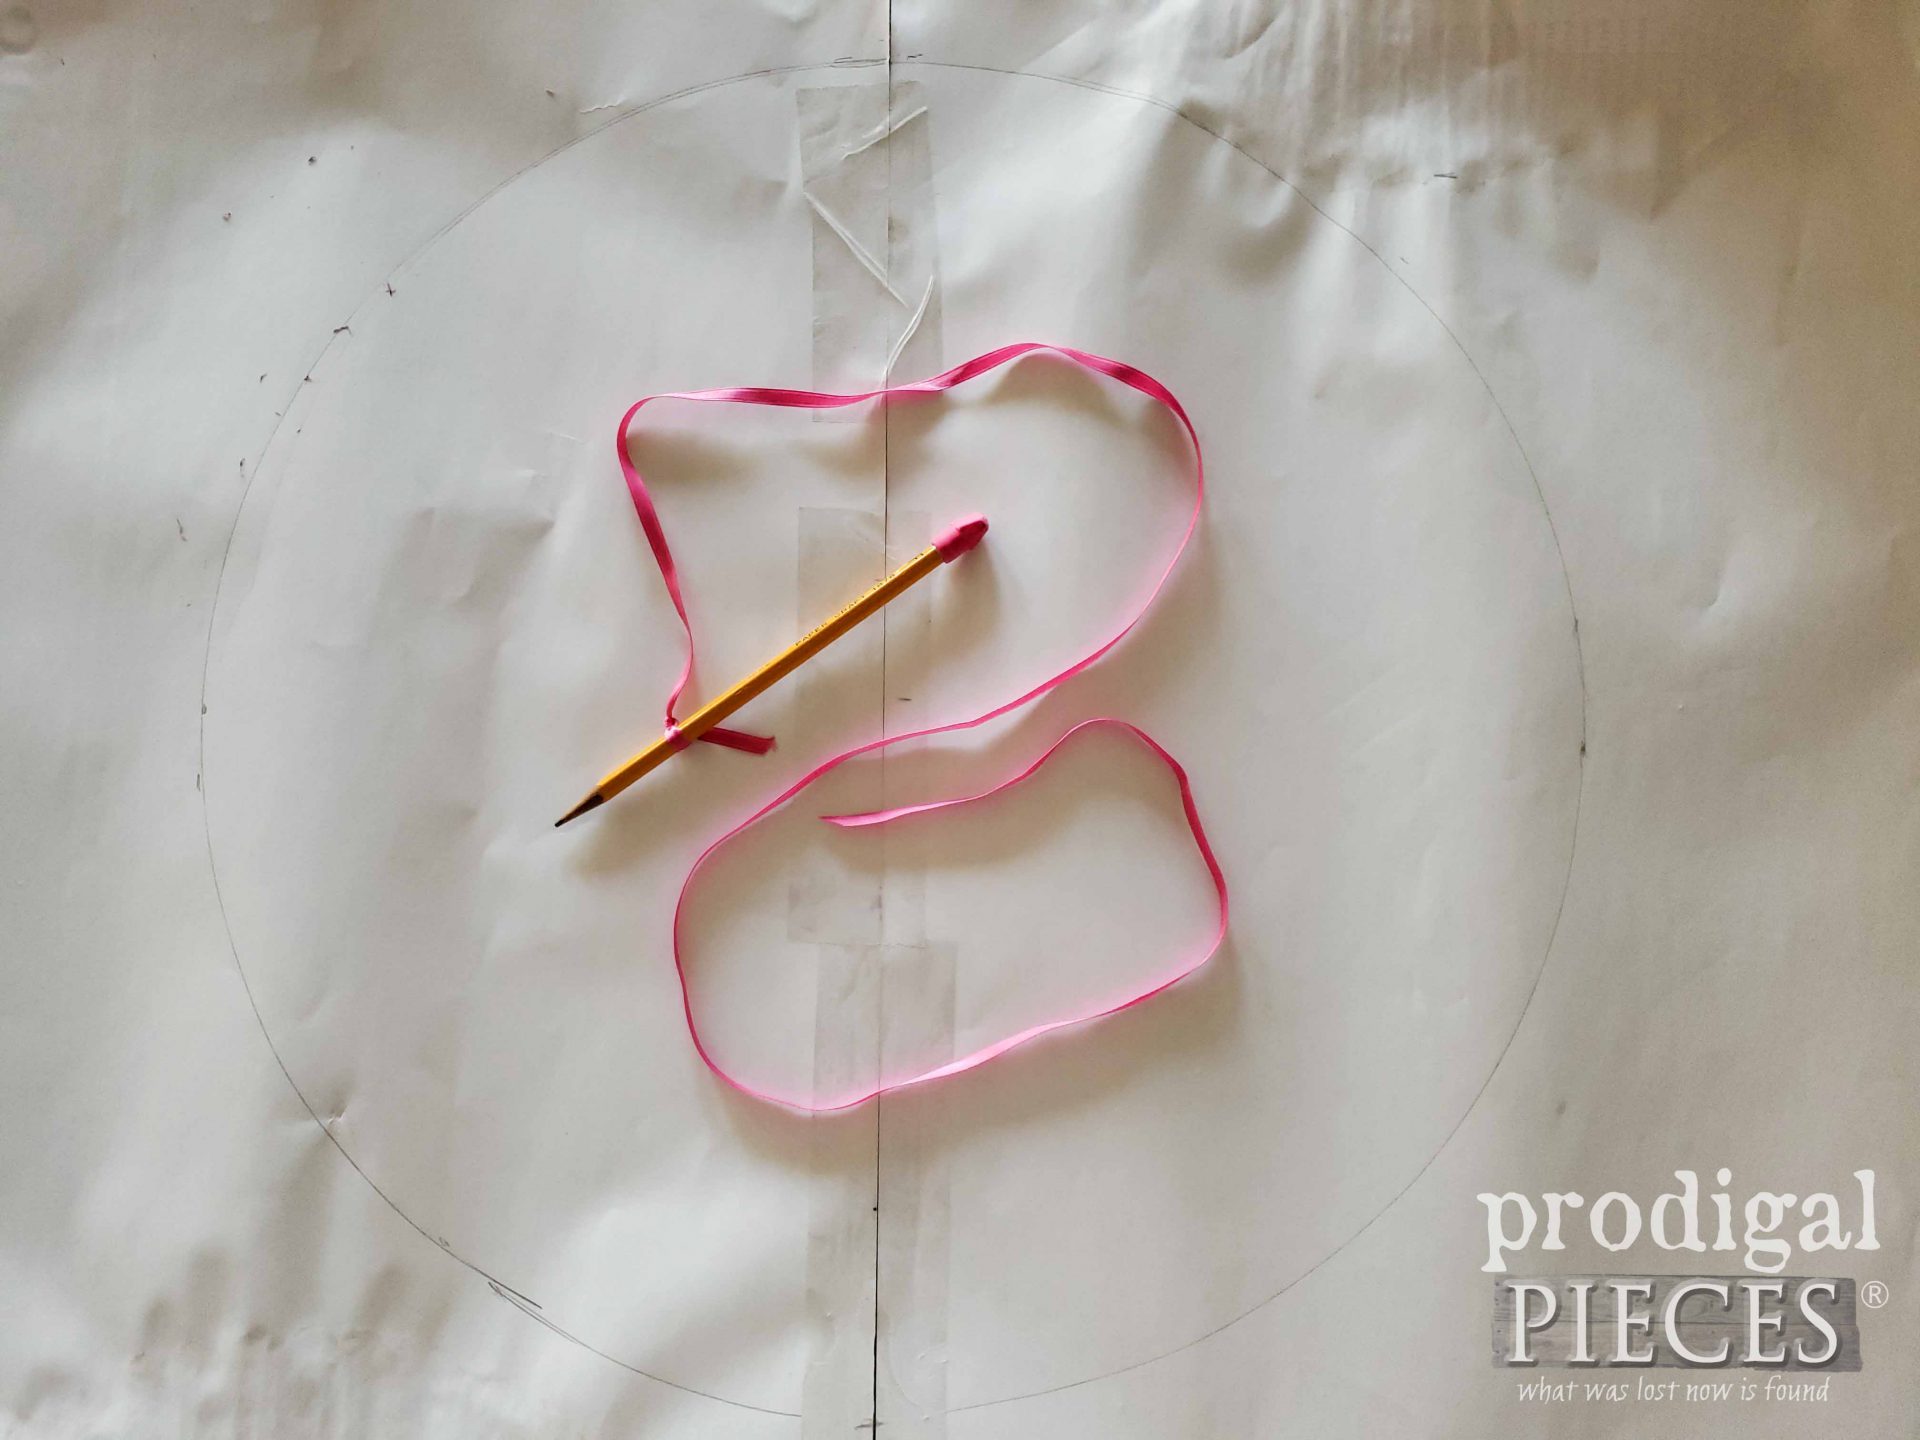 Paper Circle Template for Upcycled Bandana Drawstring Bag Tutorial by Larissa of Prodigal Pieces | prodigalpieces.com